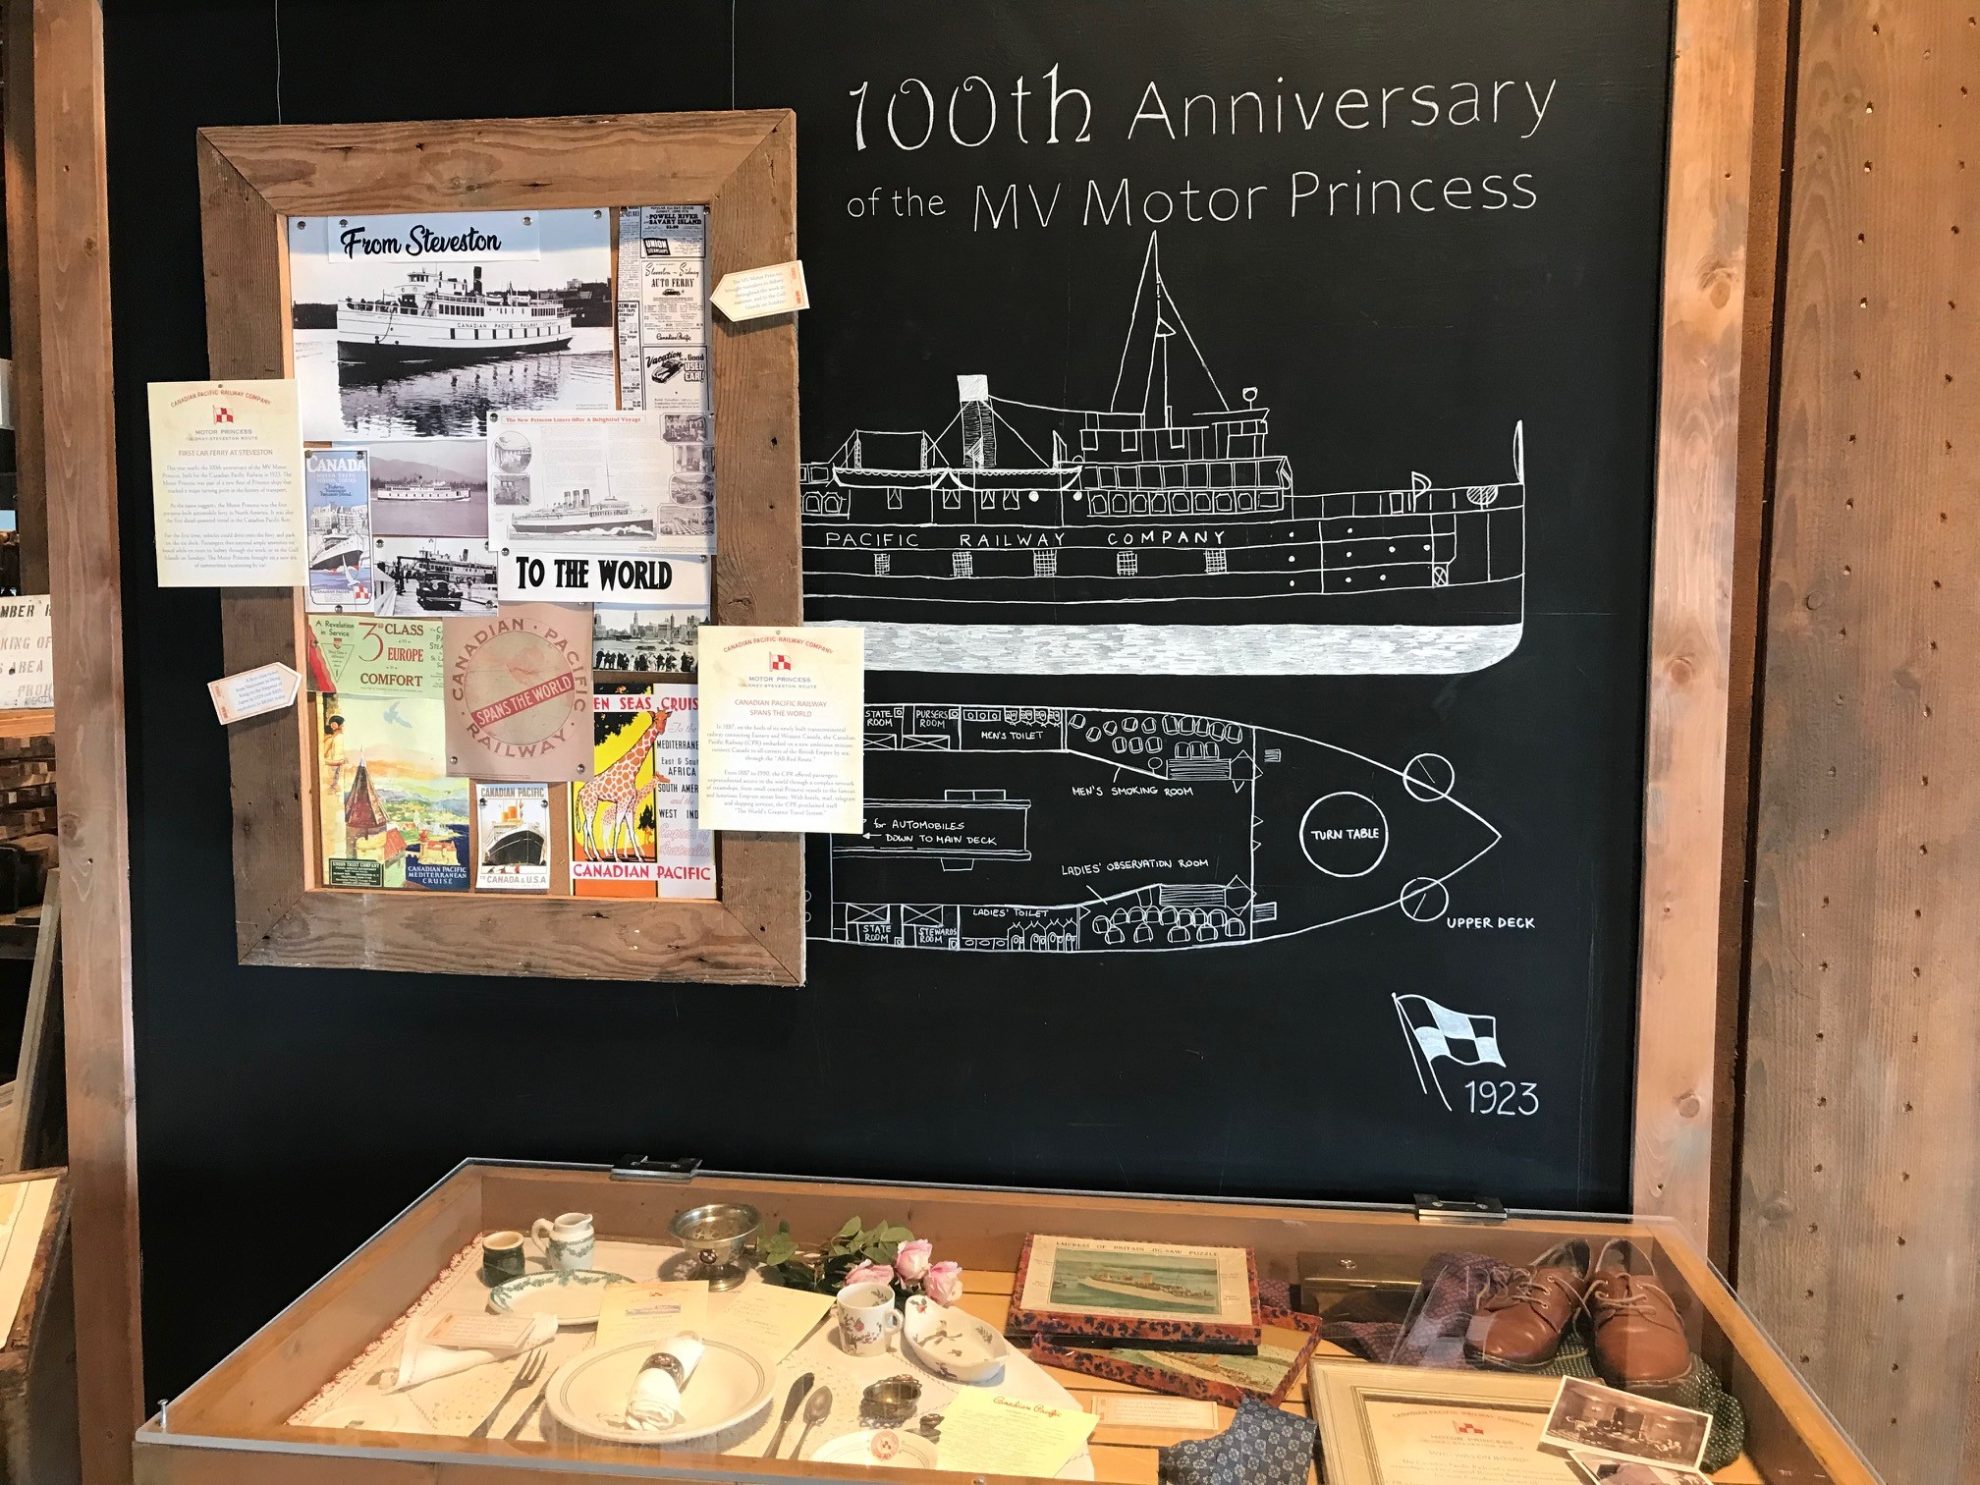 Chalkboard with side view and cross-section chalk drawing of the MV Motor Princess next to a bulletin board of archival documents and displayed above plexi covered table displaying a dining set and museum artefacts